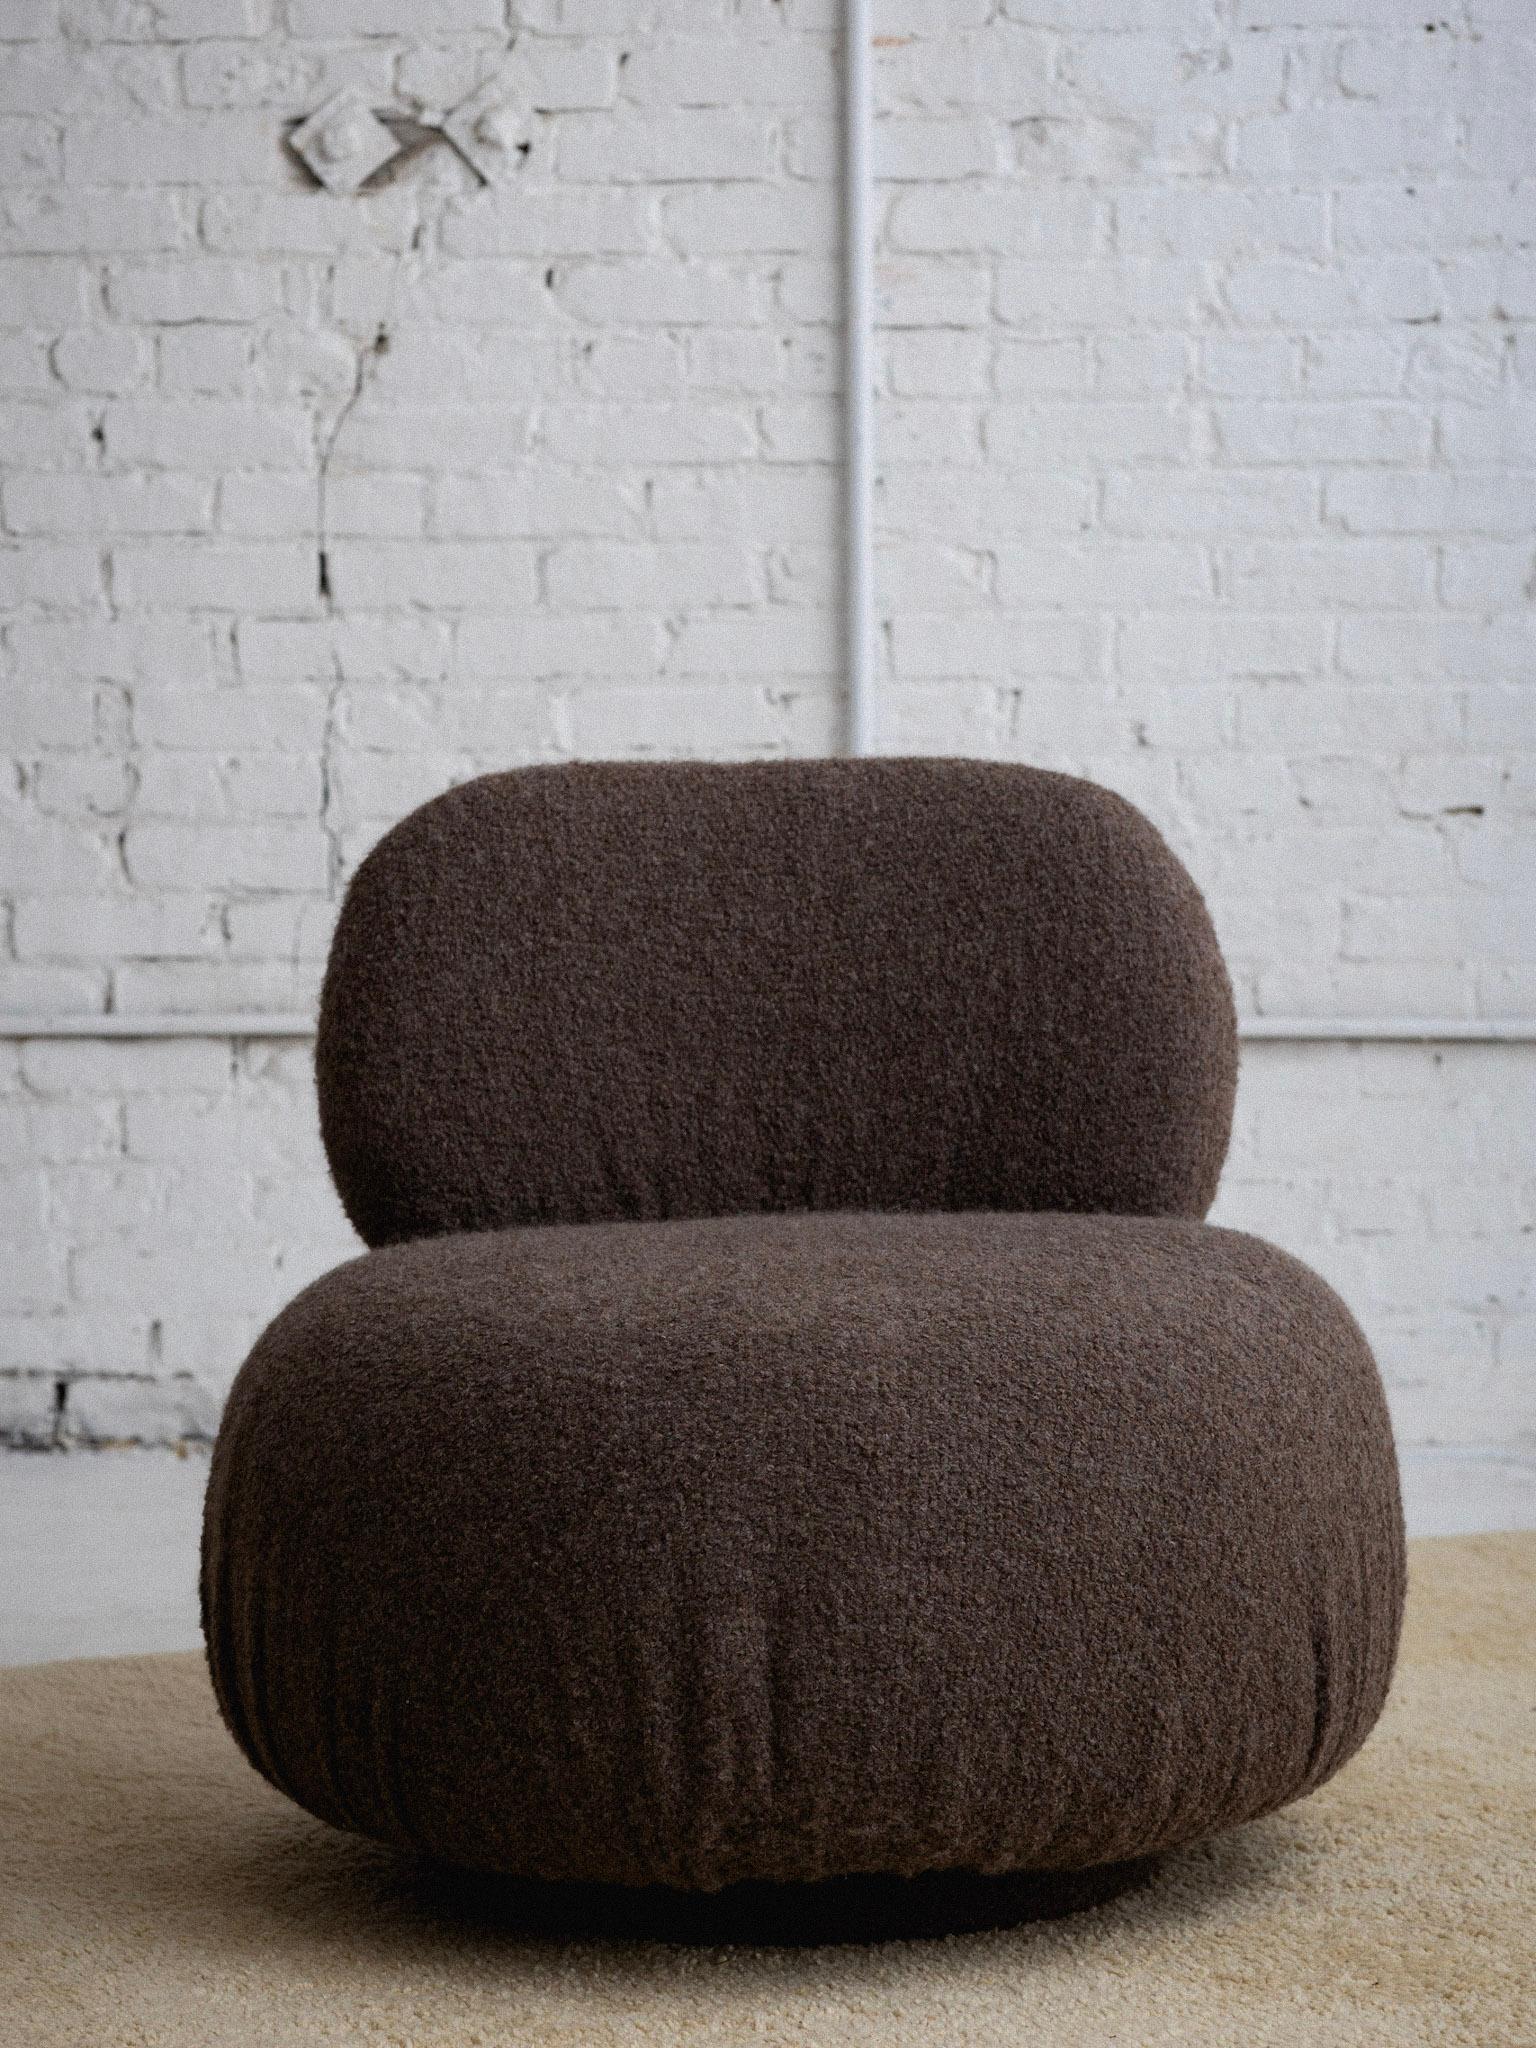 Wool Post Modern Swivel Pouf Chair in the Style of Steve Chase